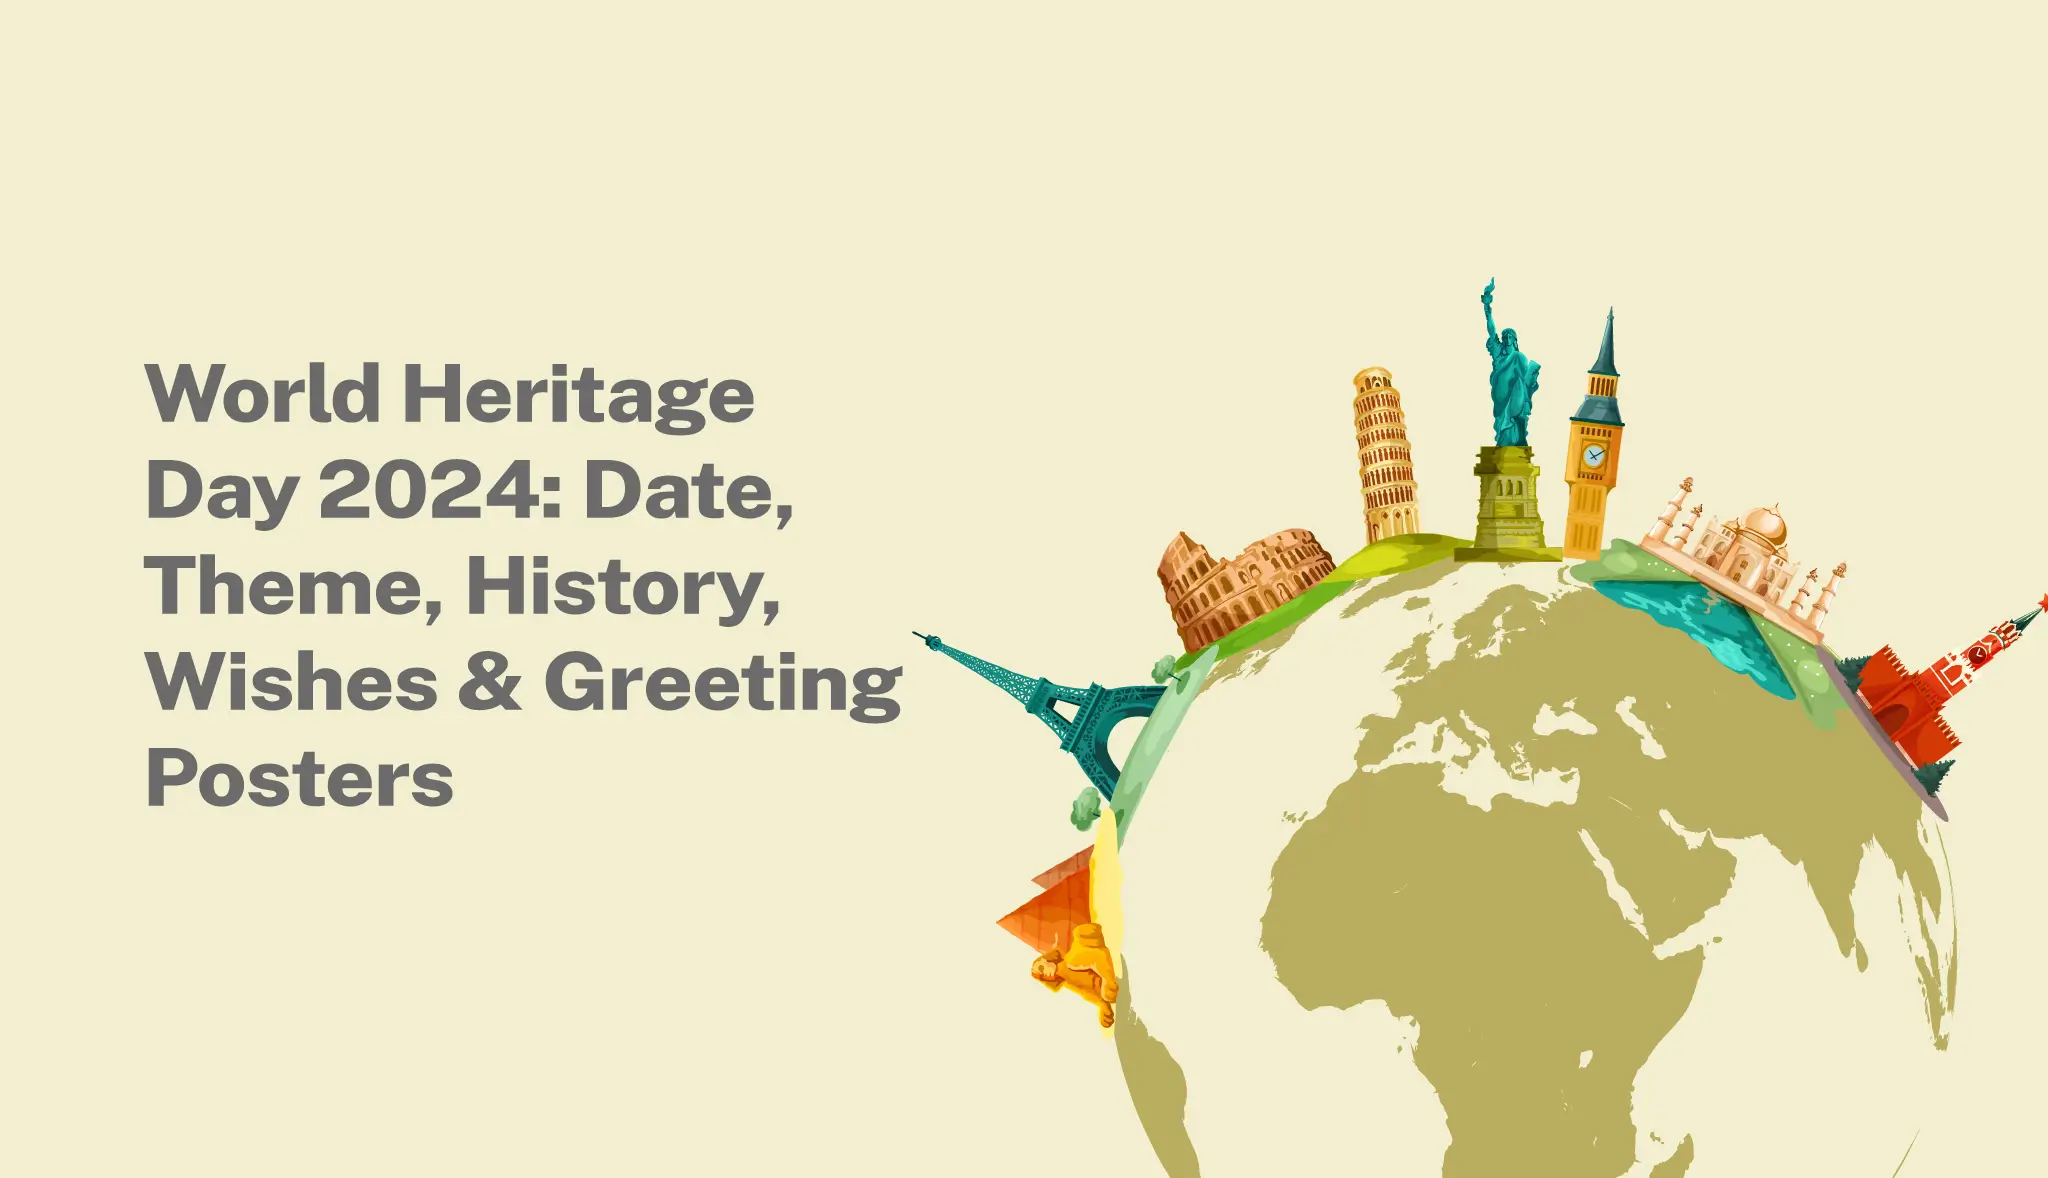 World Heritage Day 2024: Date, Theme, Wishes & Greeting Posters - Postive